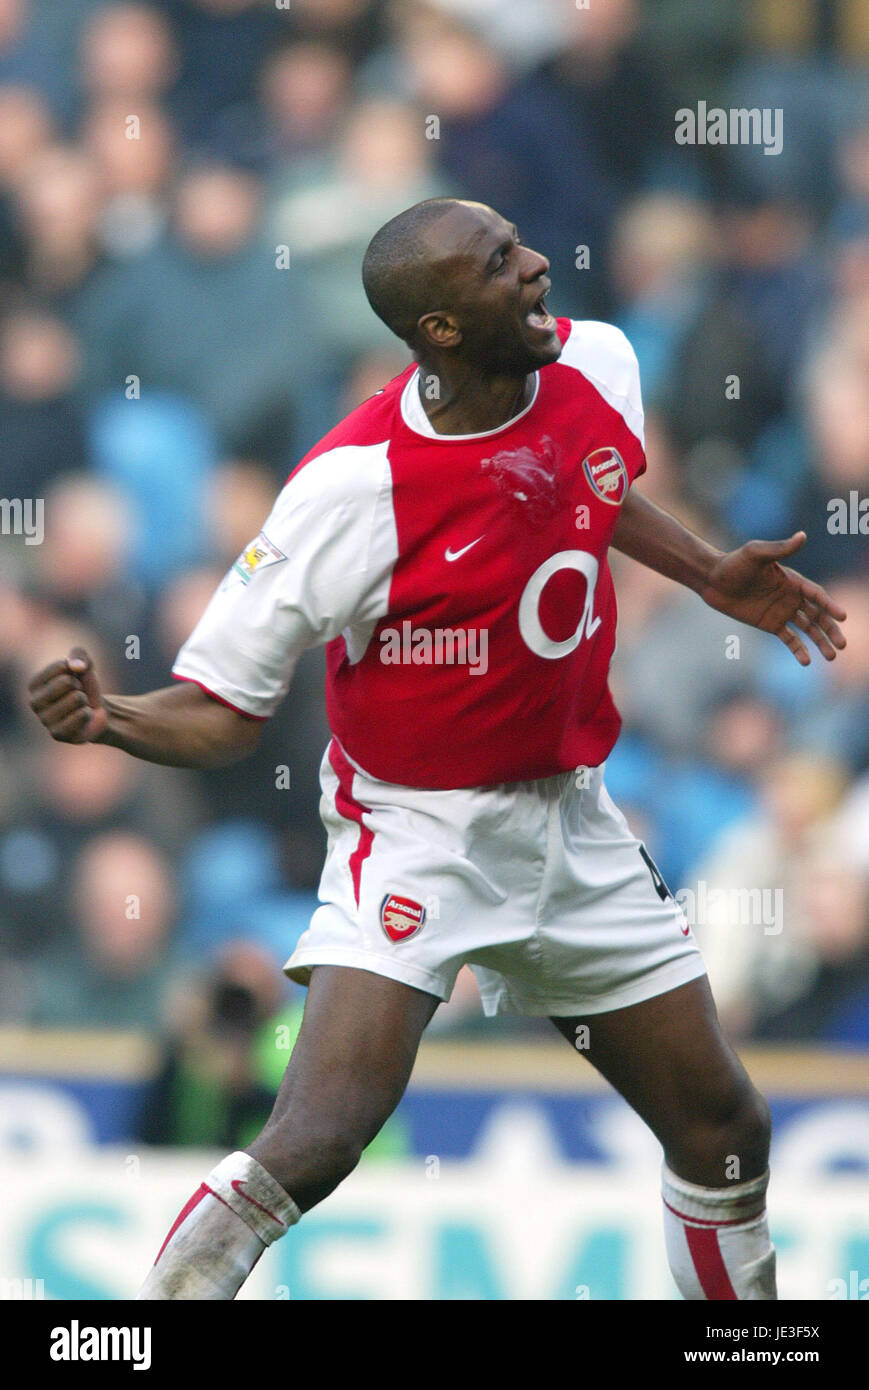 Patrick Vieira High Resolution Stock Photography and Images - Alamy